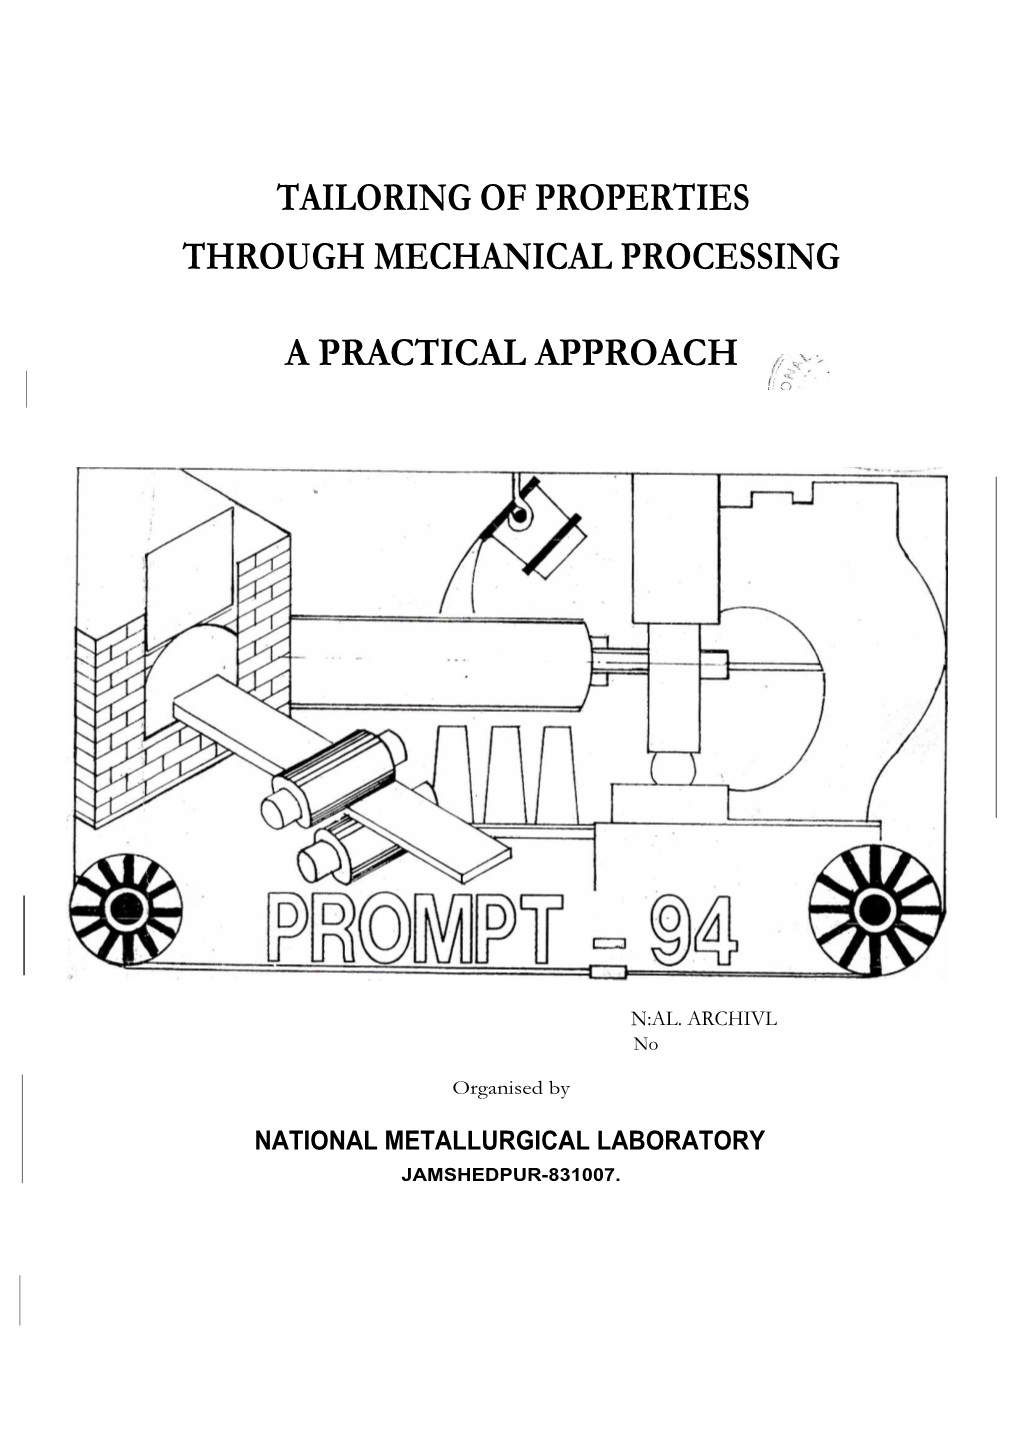 Tailoring of Properties Through Mechanical Processing a Practical